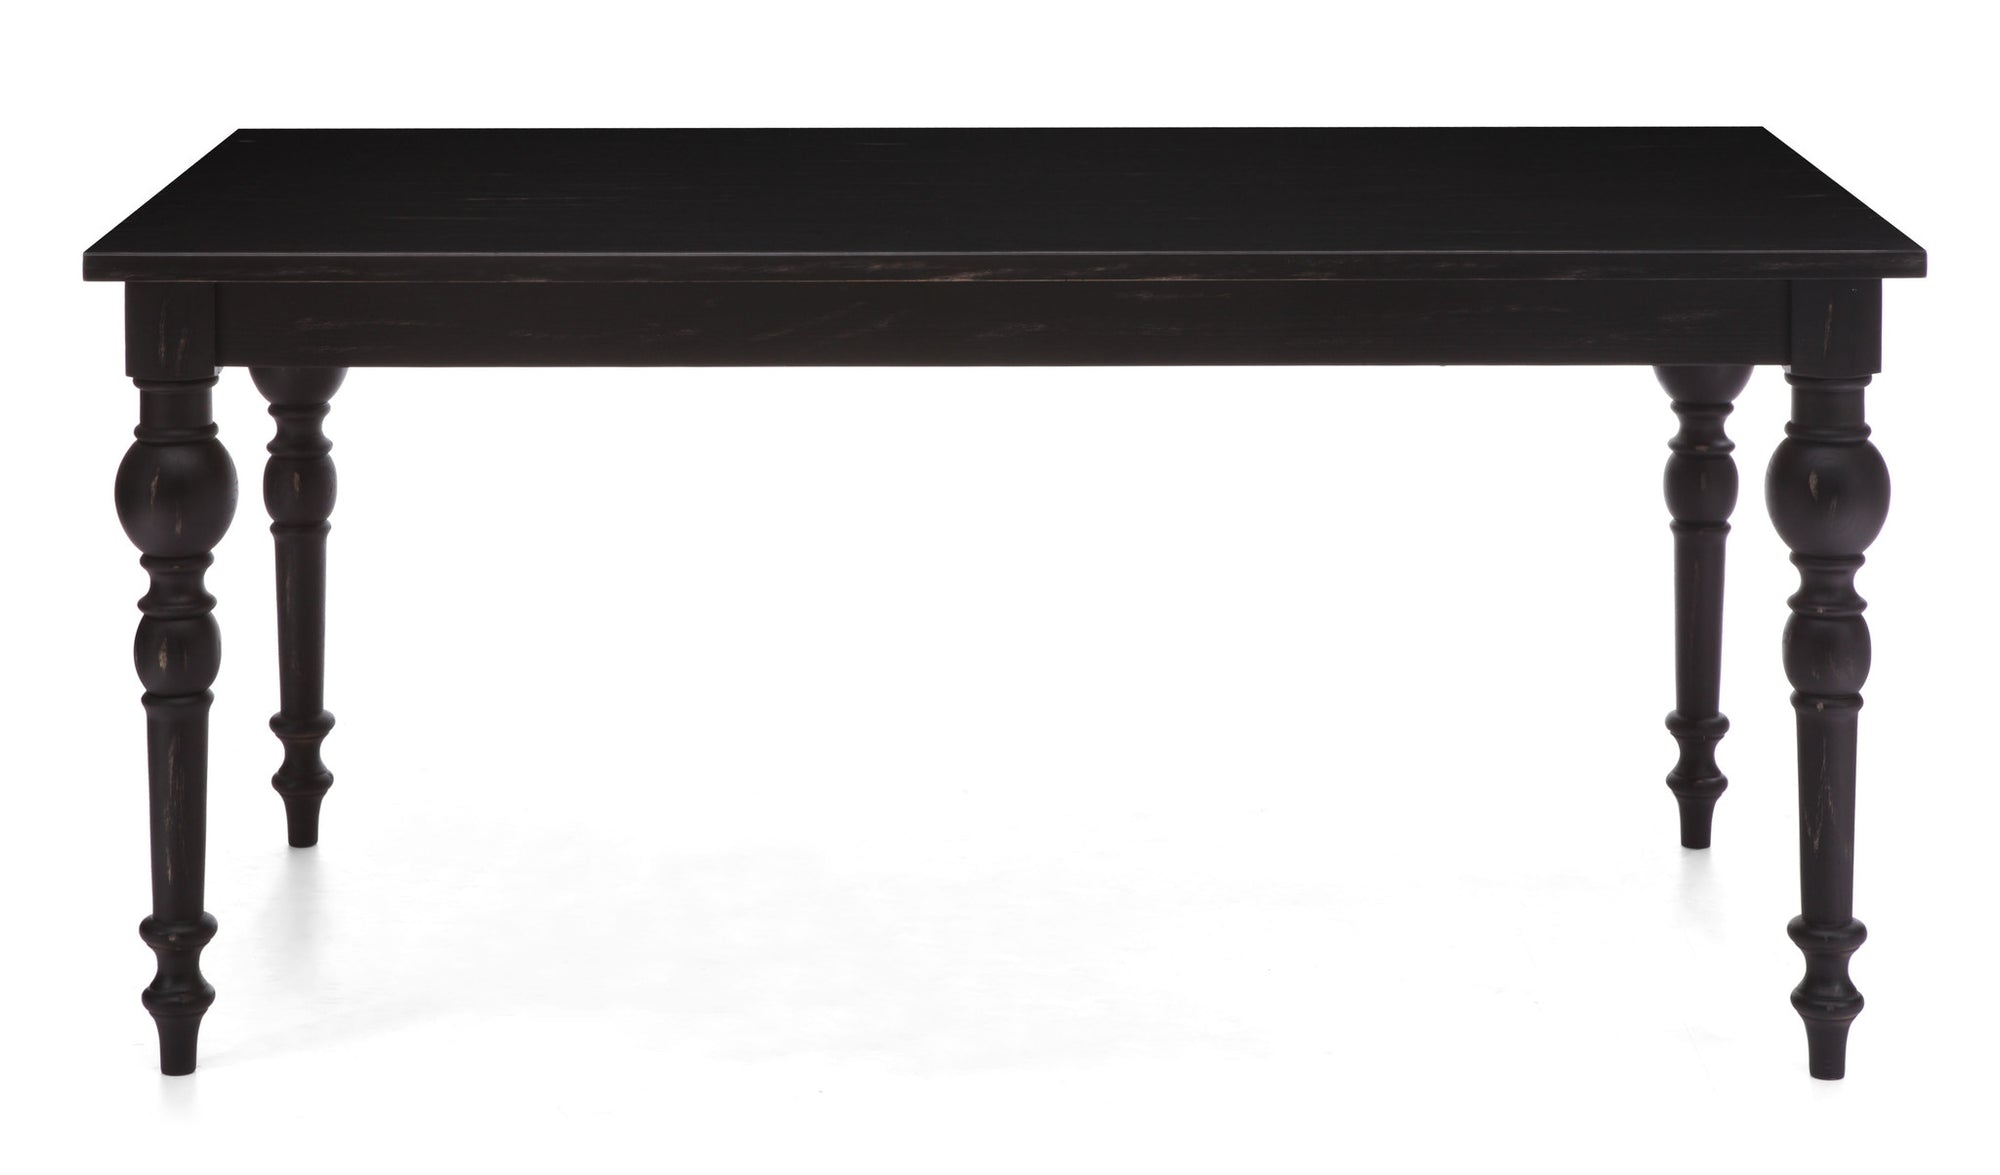 Sandisfield Dining Table Antique Black